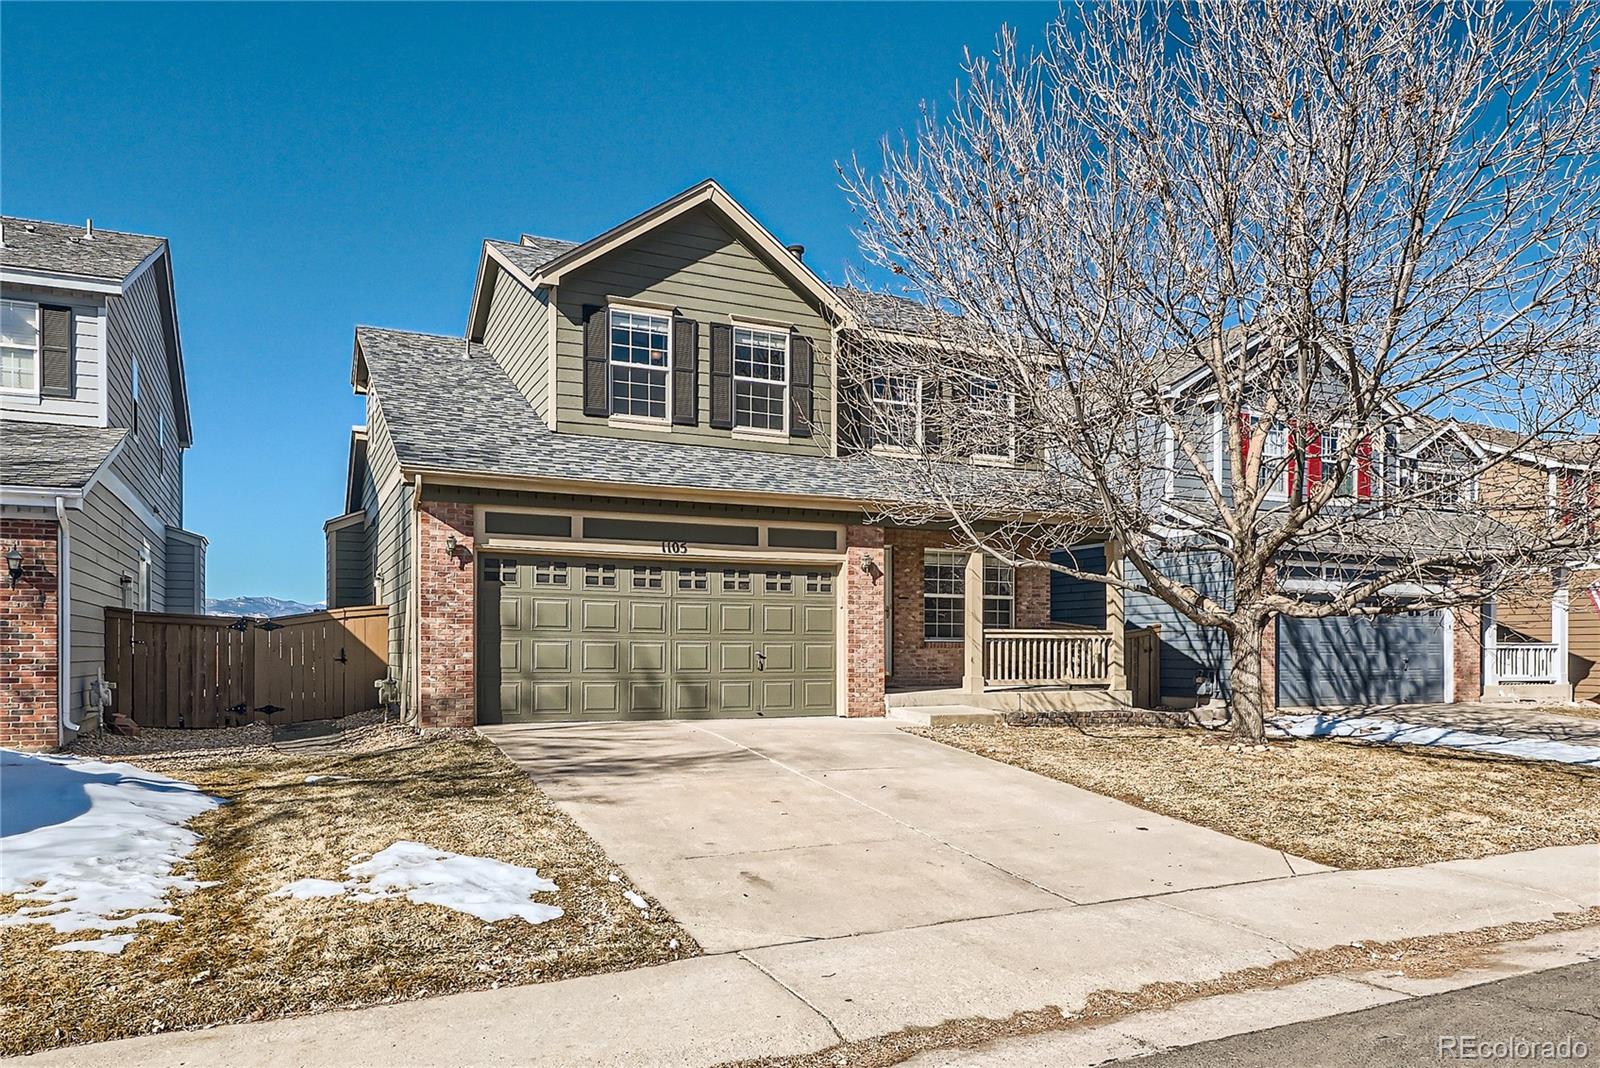 1105  mulberry lane, Highlands Ranch sold home. Closed on 2024-04-04 for $655,000.